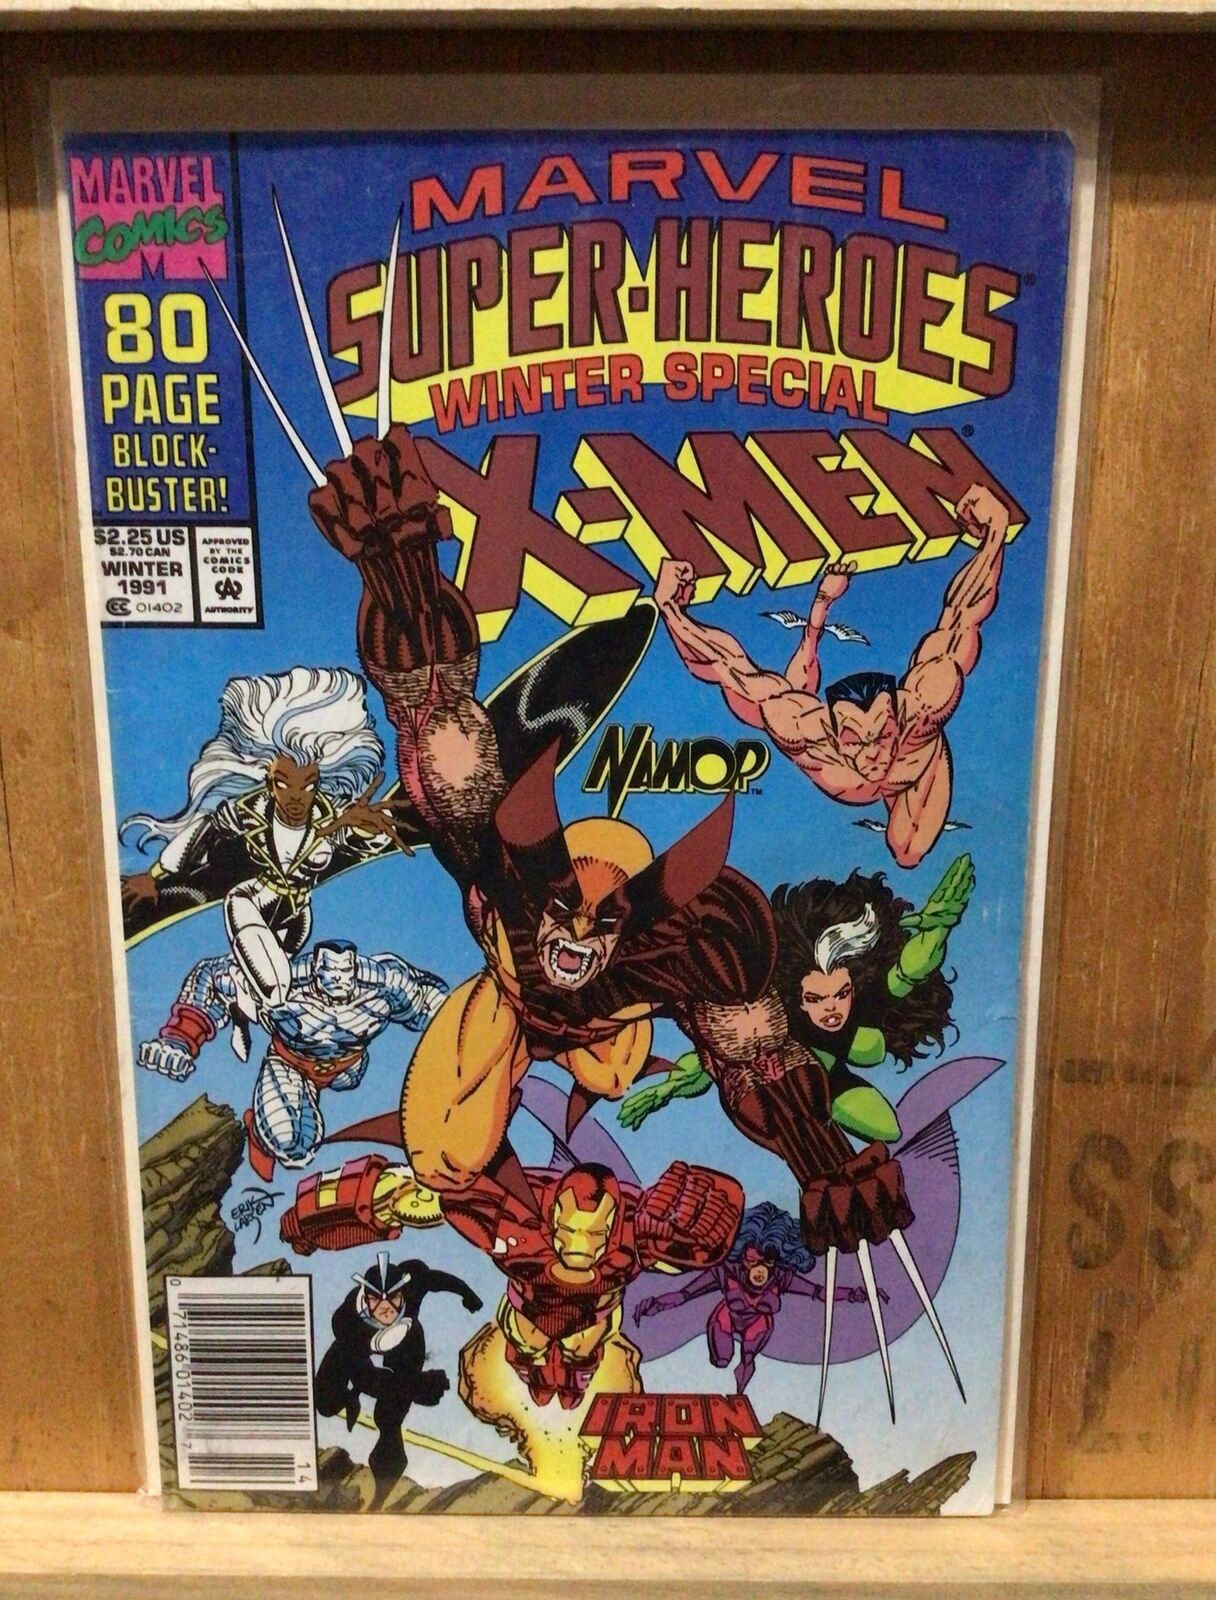 Marvel Super Heroes Winter Special 1991 #8 1st Appearance Squirrel Girl